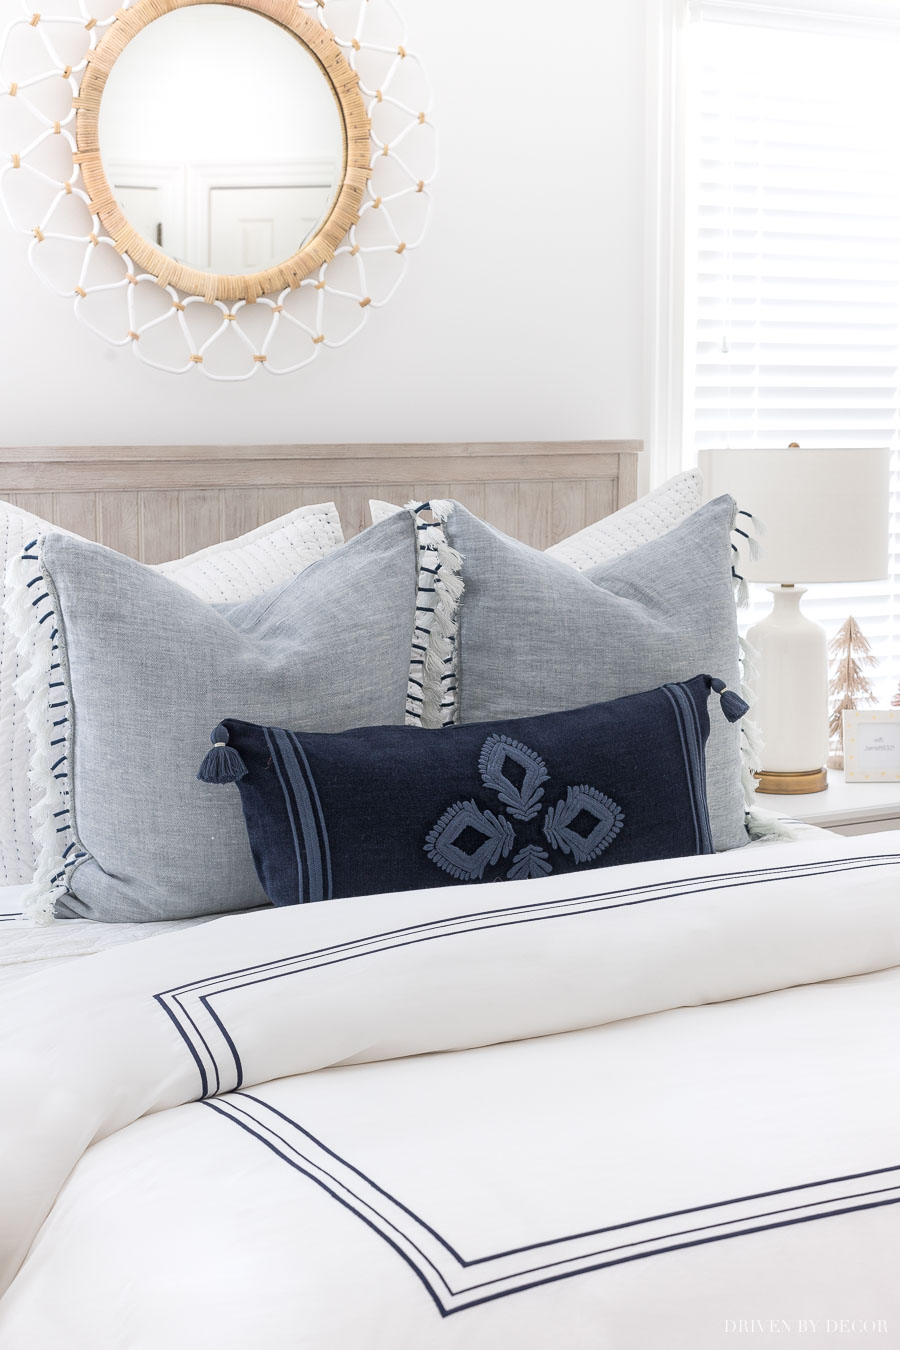 oversized decorative pillows for bed